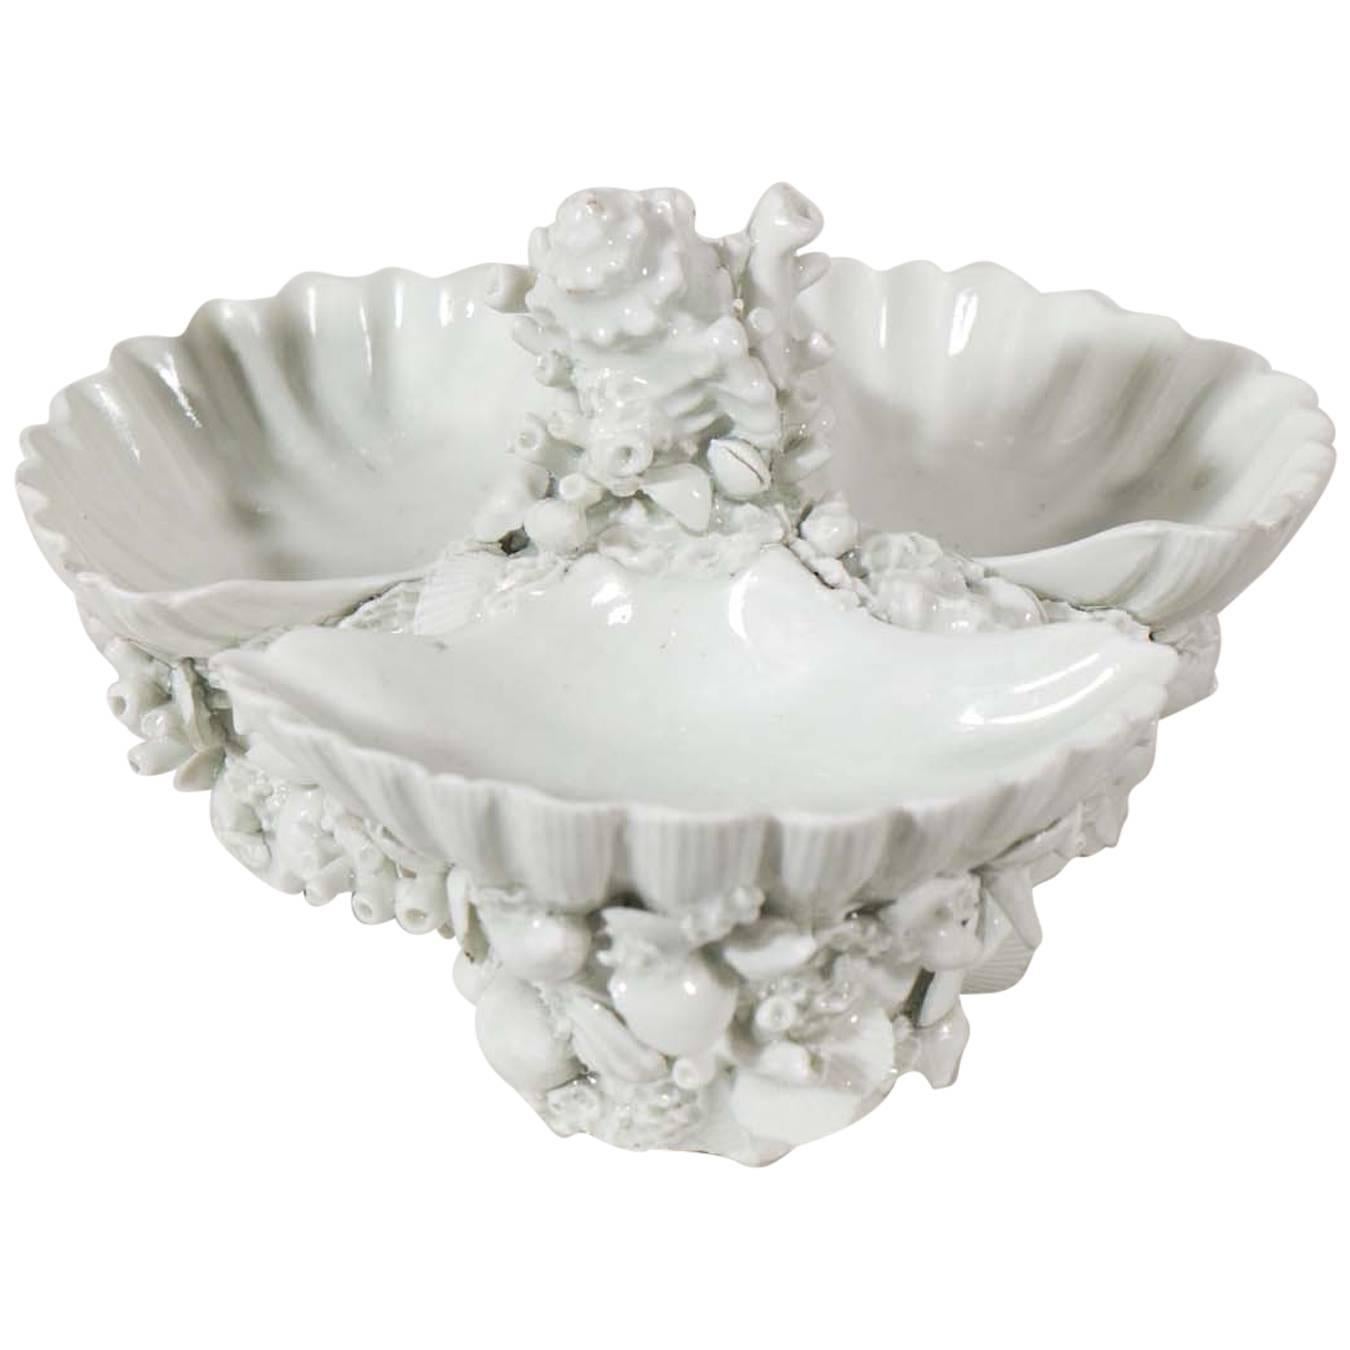 First Period Dr. Wall Worcester Porcelain Sweetmeat Dish with Three Shell Shapes